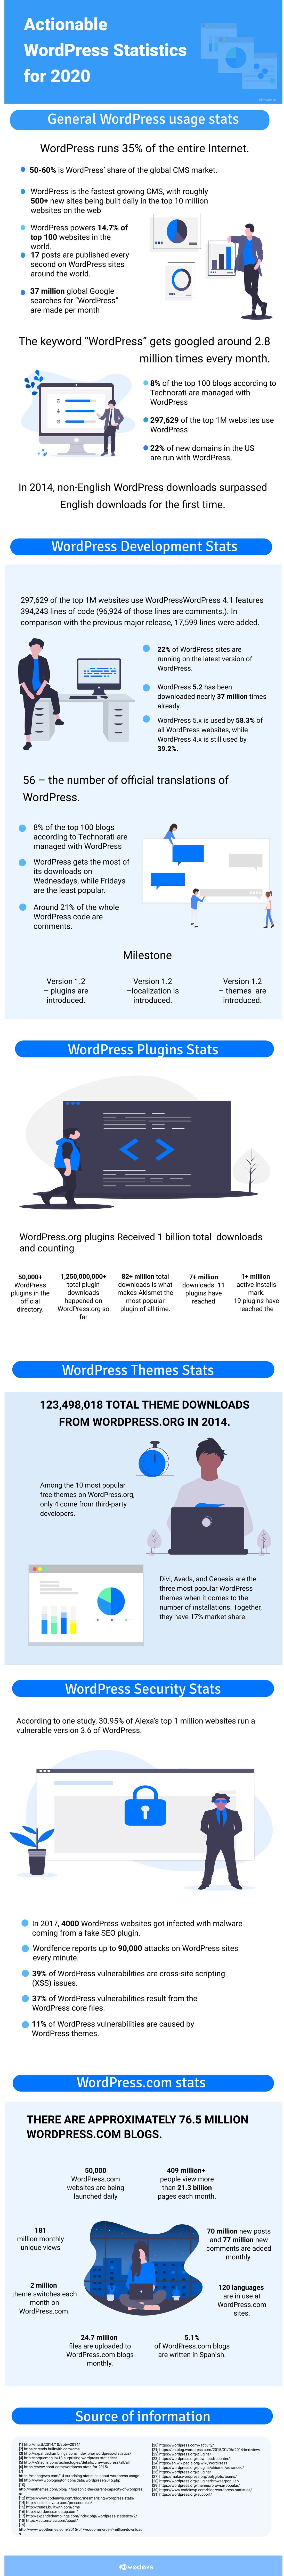 wordpress stats and facts